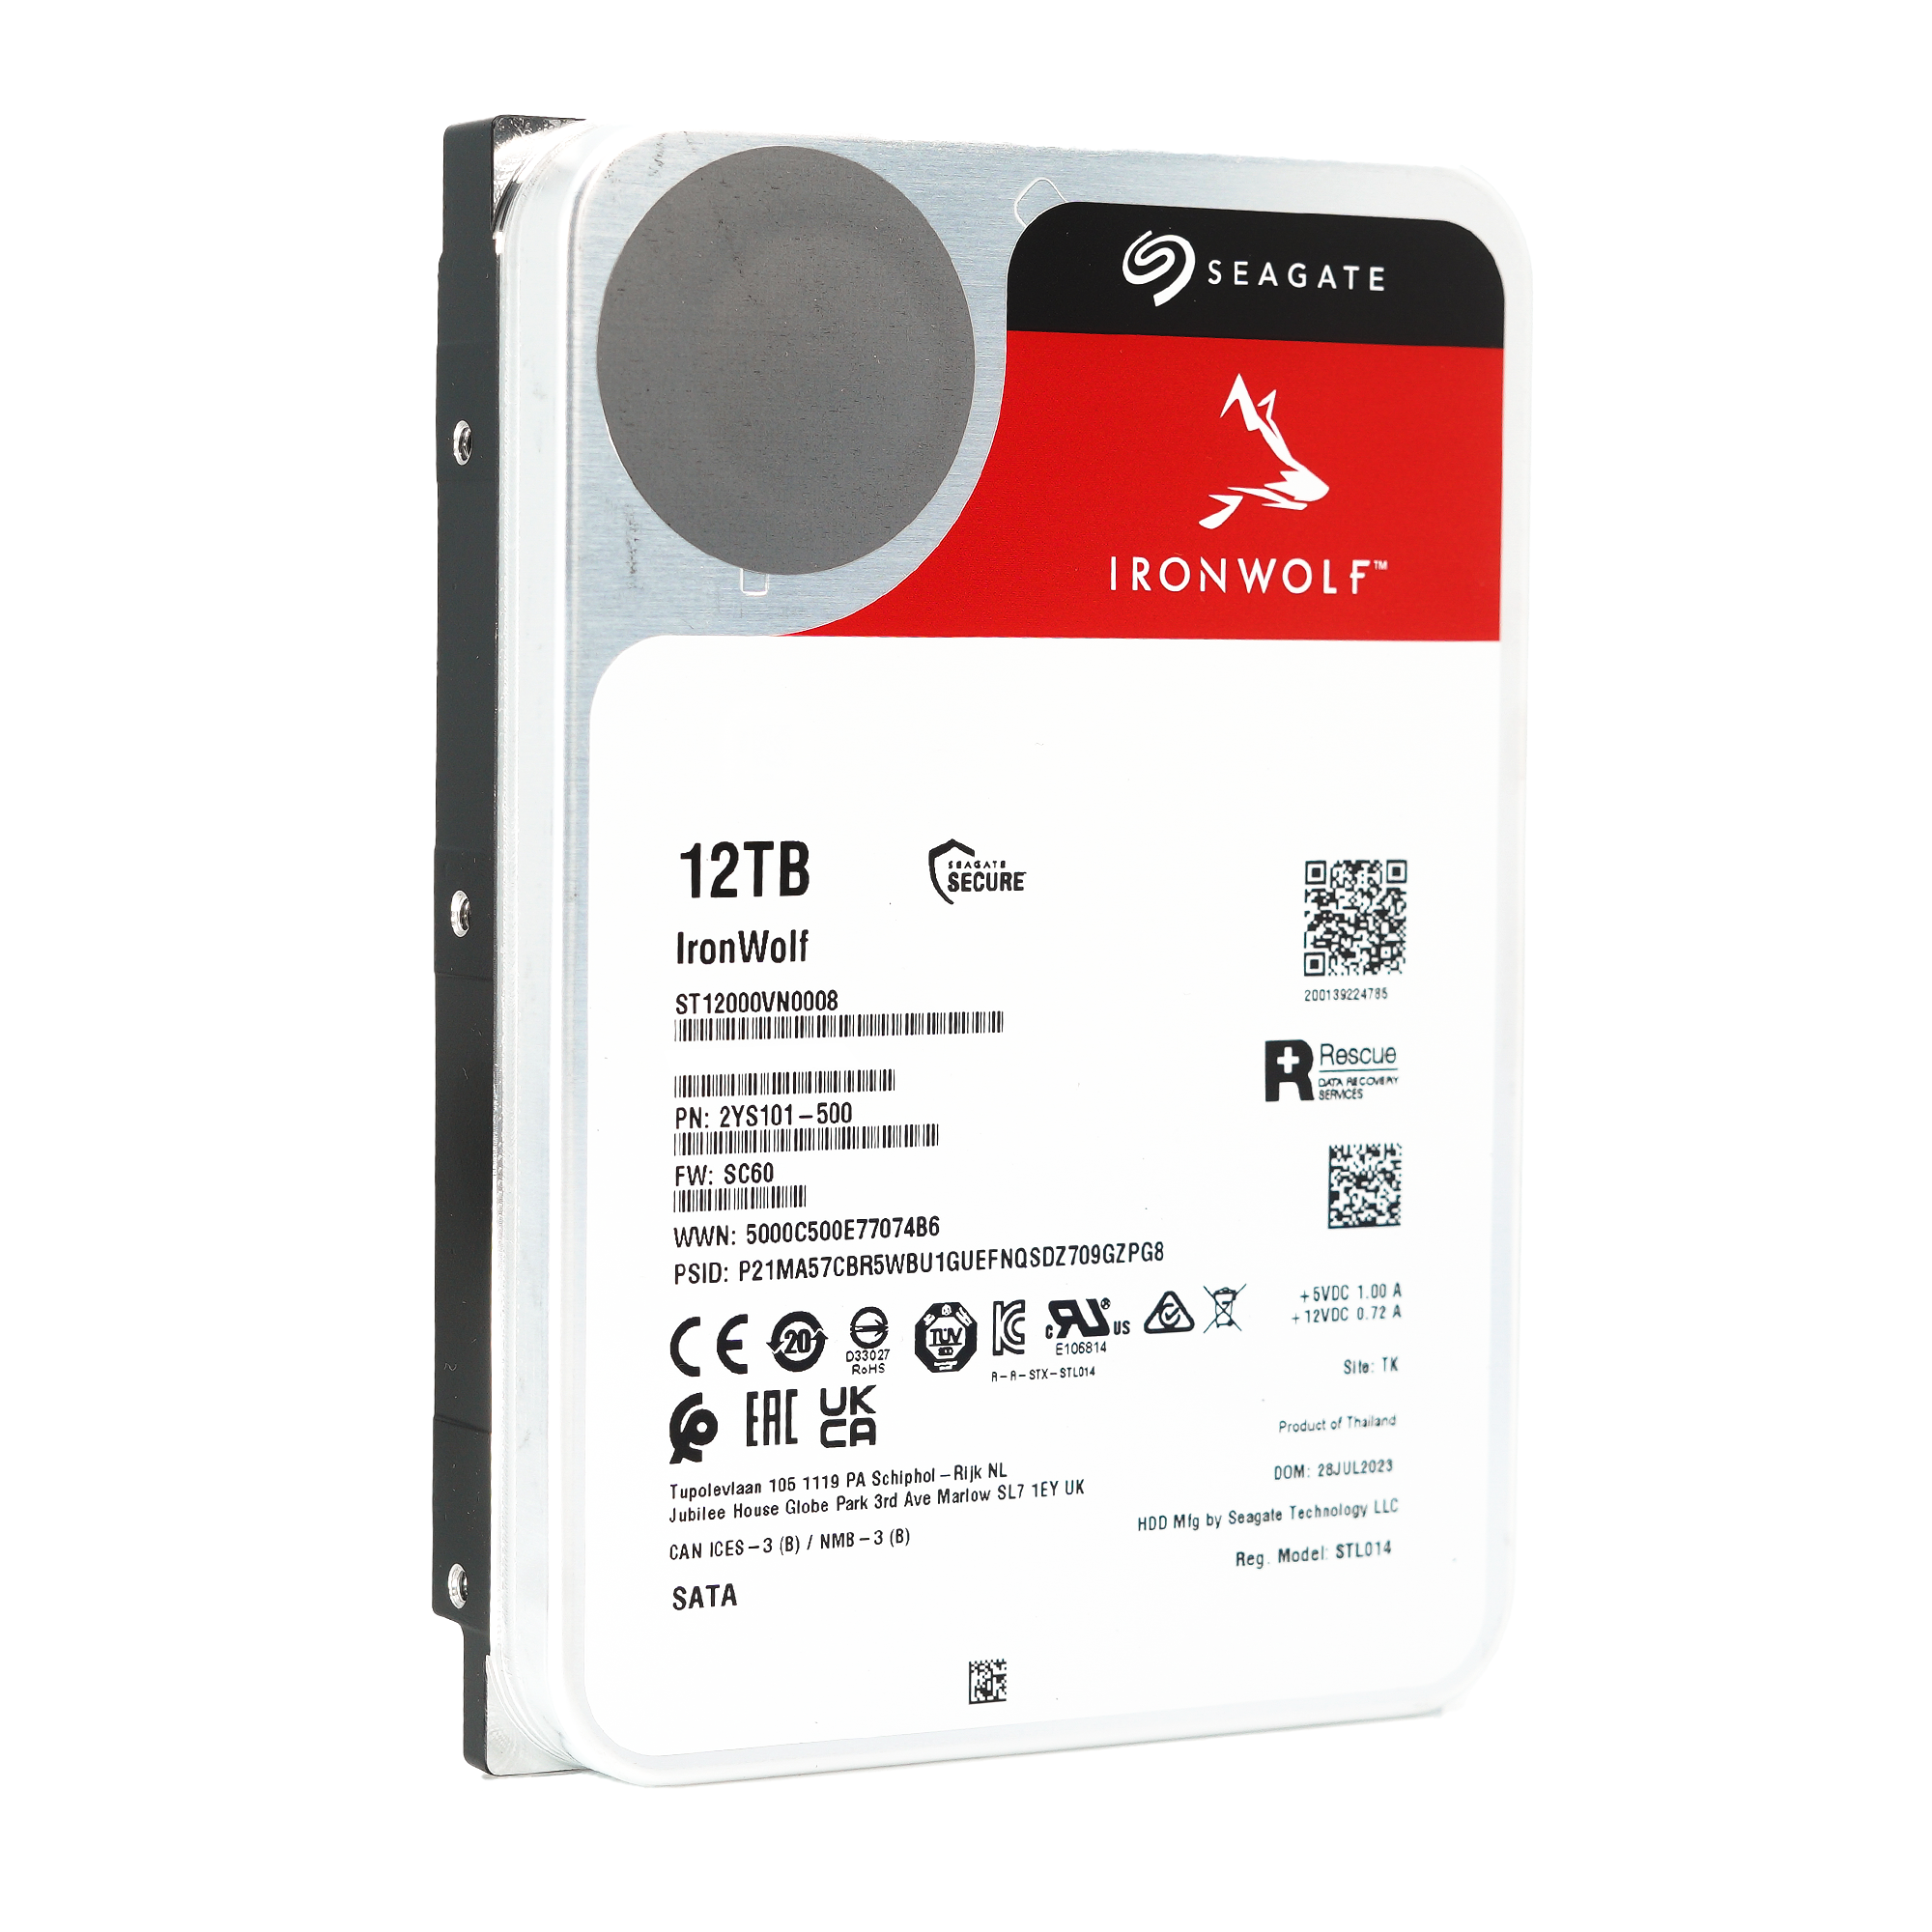 Seagate IronWolf ST12000VN0008 12TB 7.2K RPM SATA 6Gb/s 256MB 3.5" NAS Hard Drive - Front View